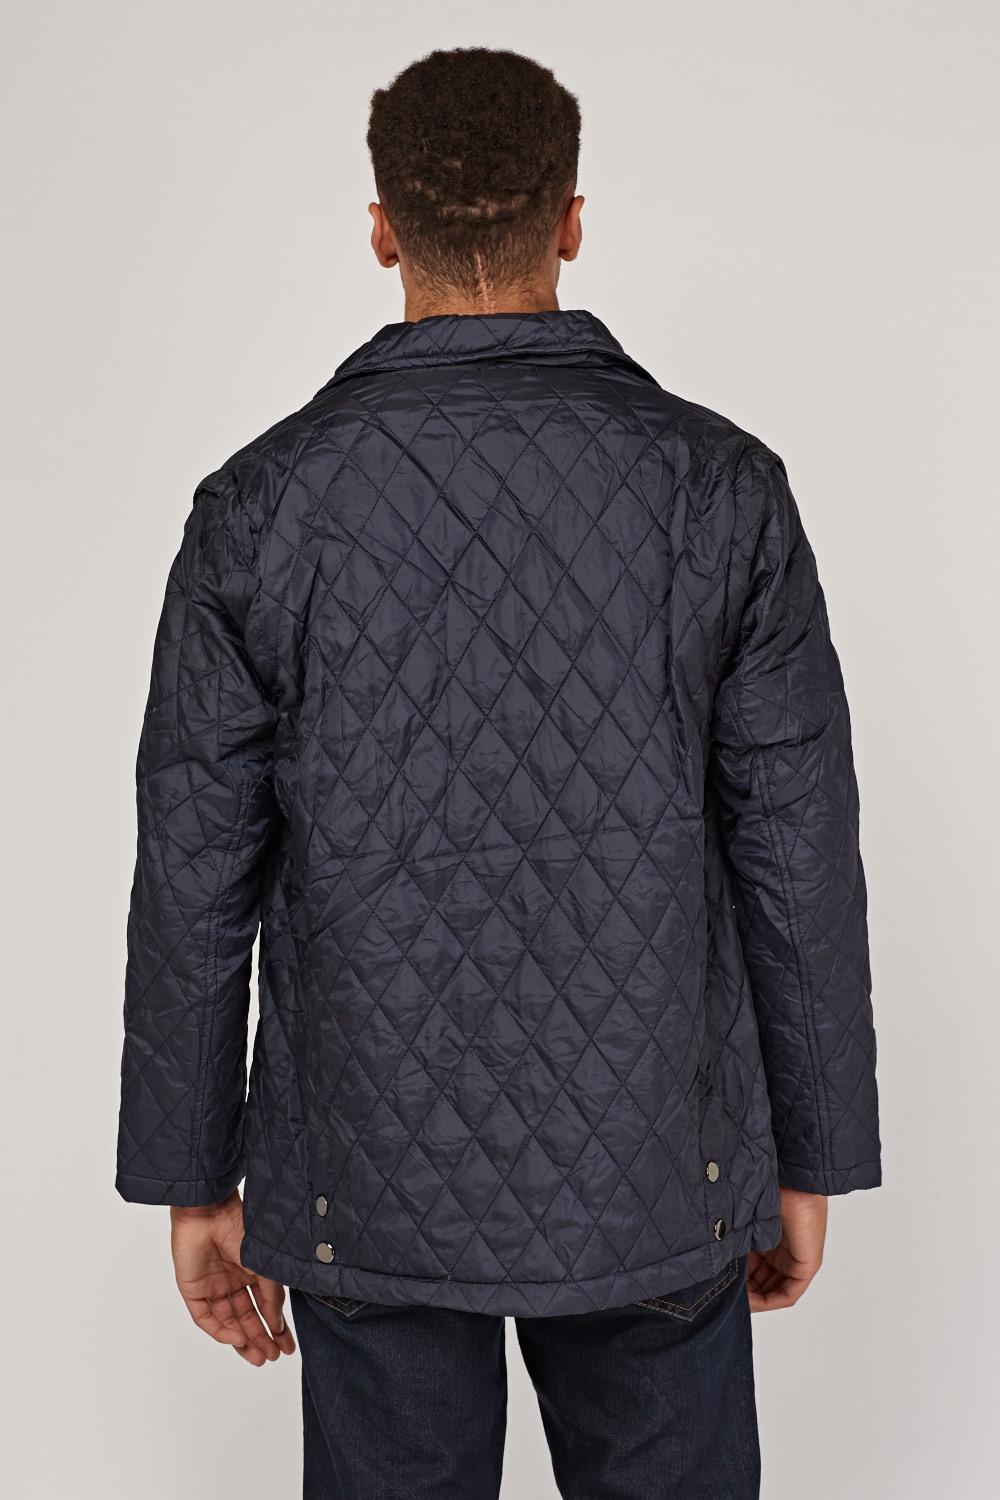 Download Diamond Quilted Detachable Sleeve Jacket - Just $7